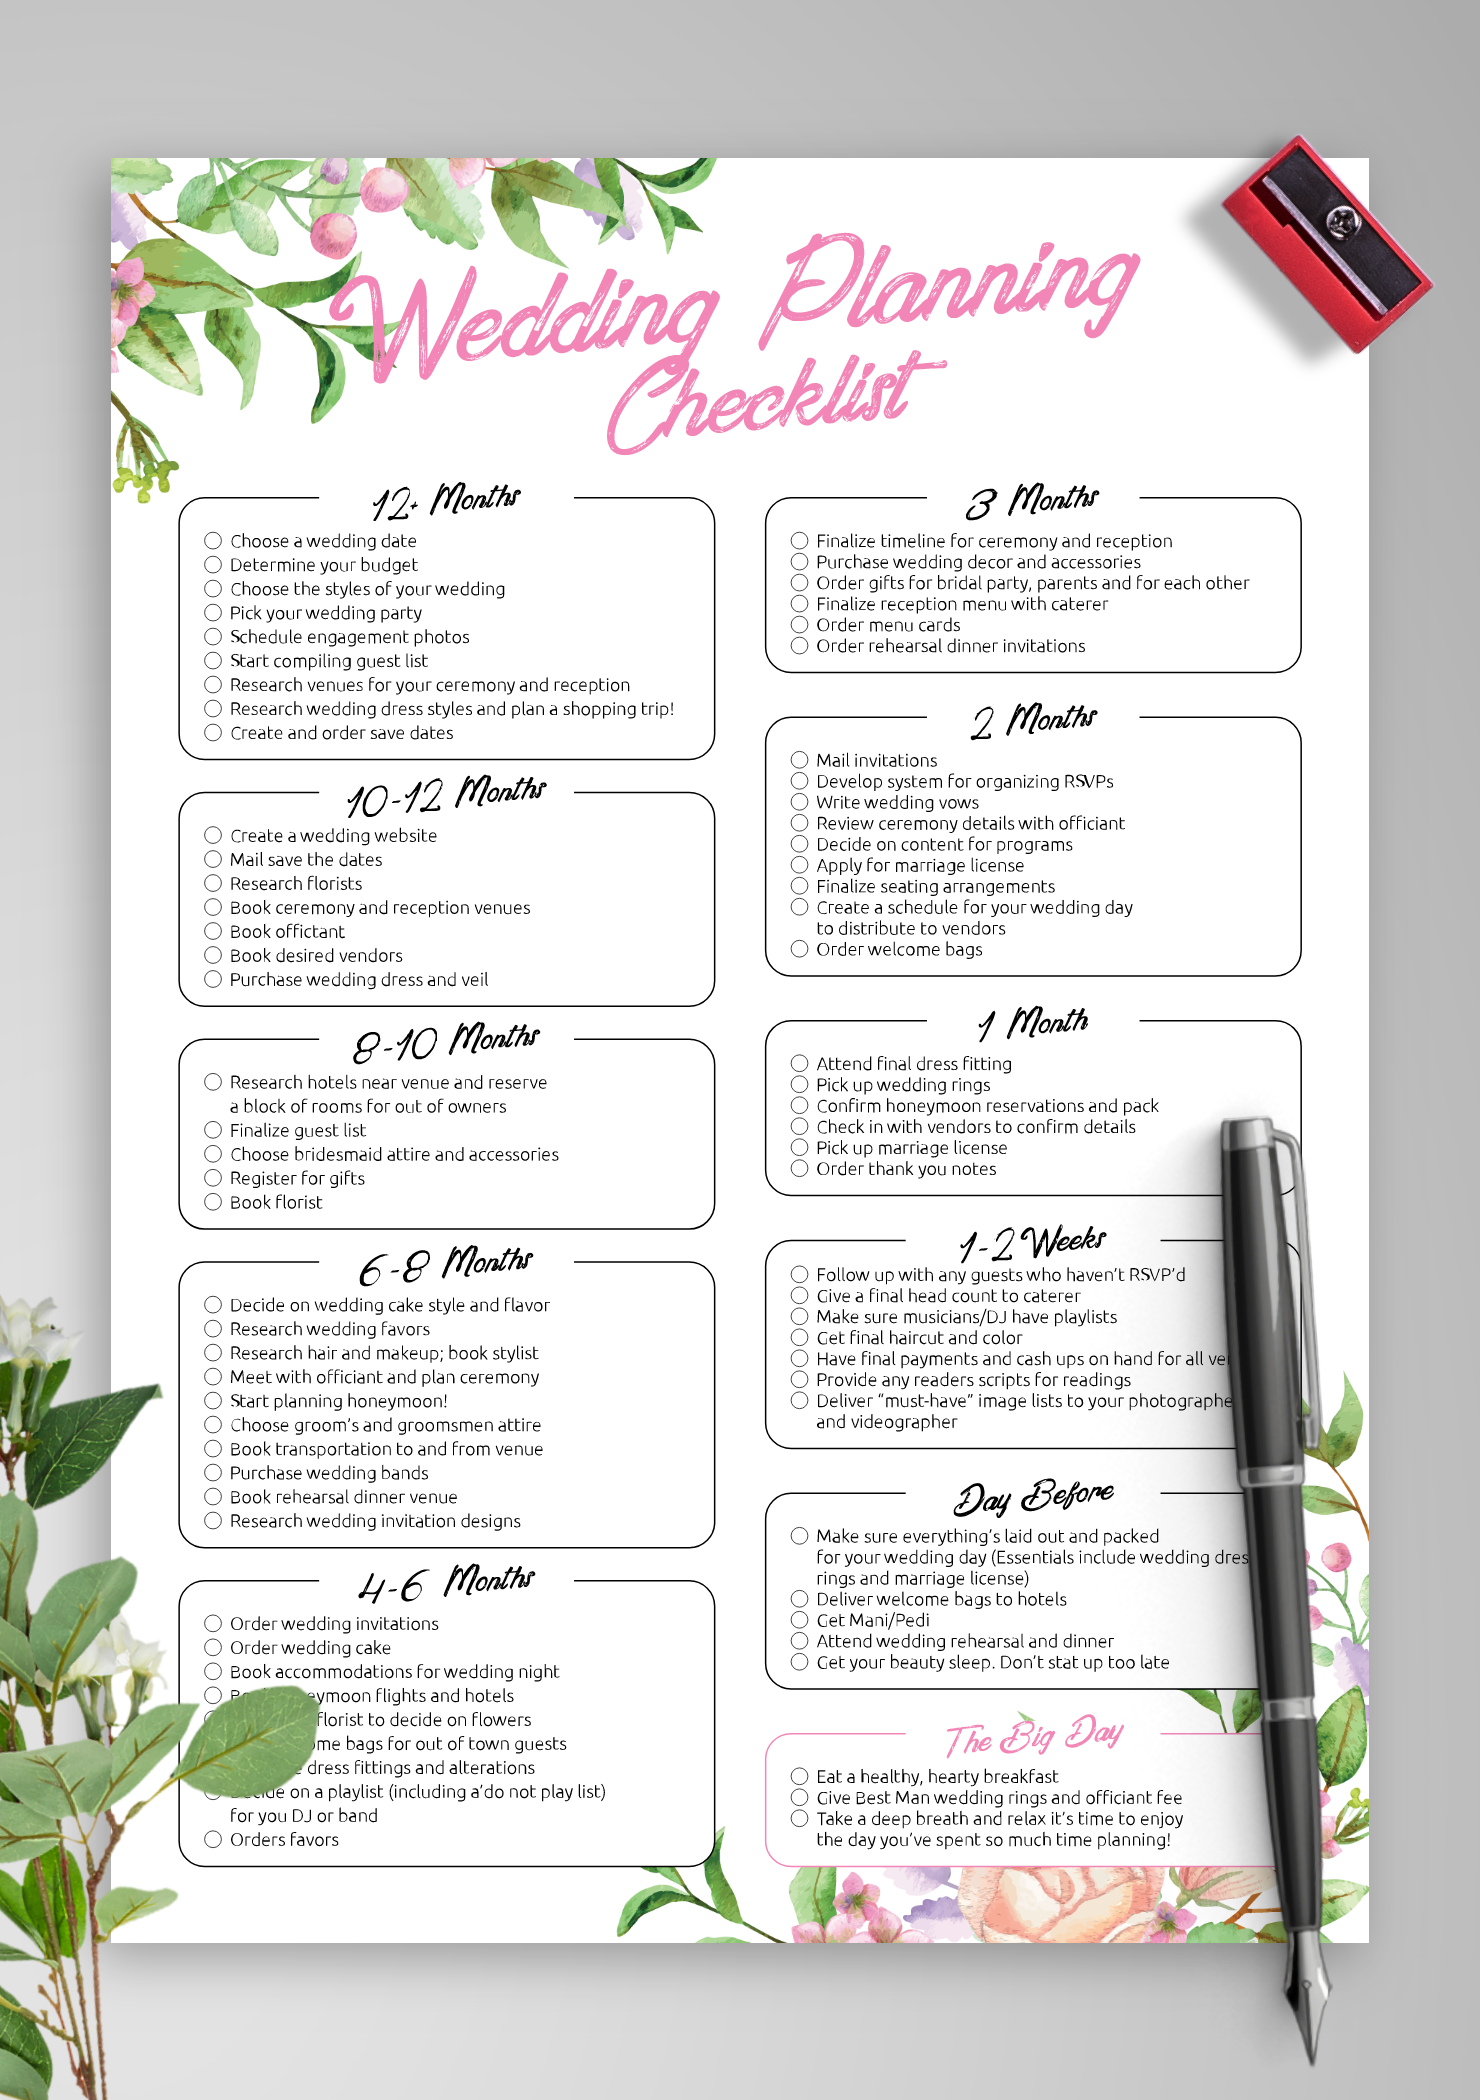 https://onplanners.com/sites/default/files/styles/template_fancy/public/template-images/printable-wedding-planning-checklist-shabby-chic-style-template.png